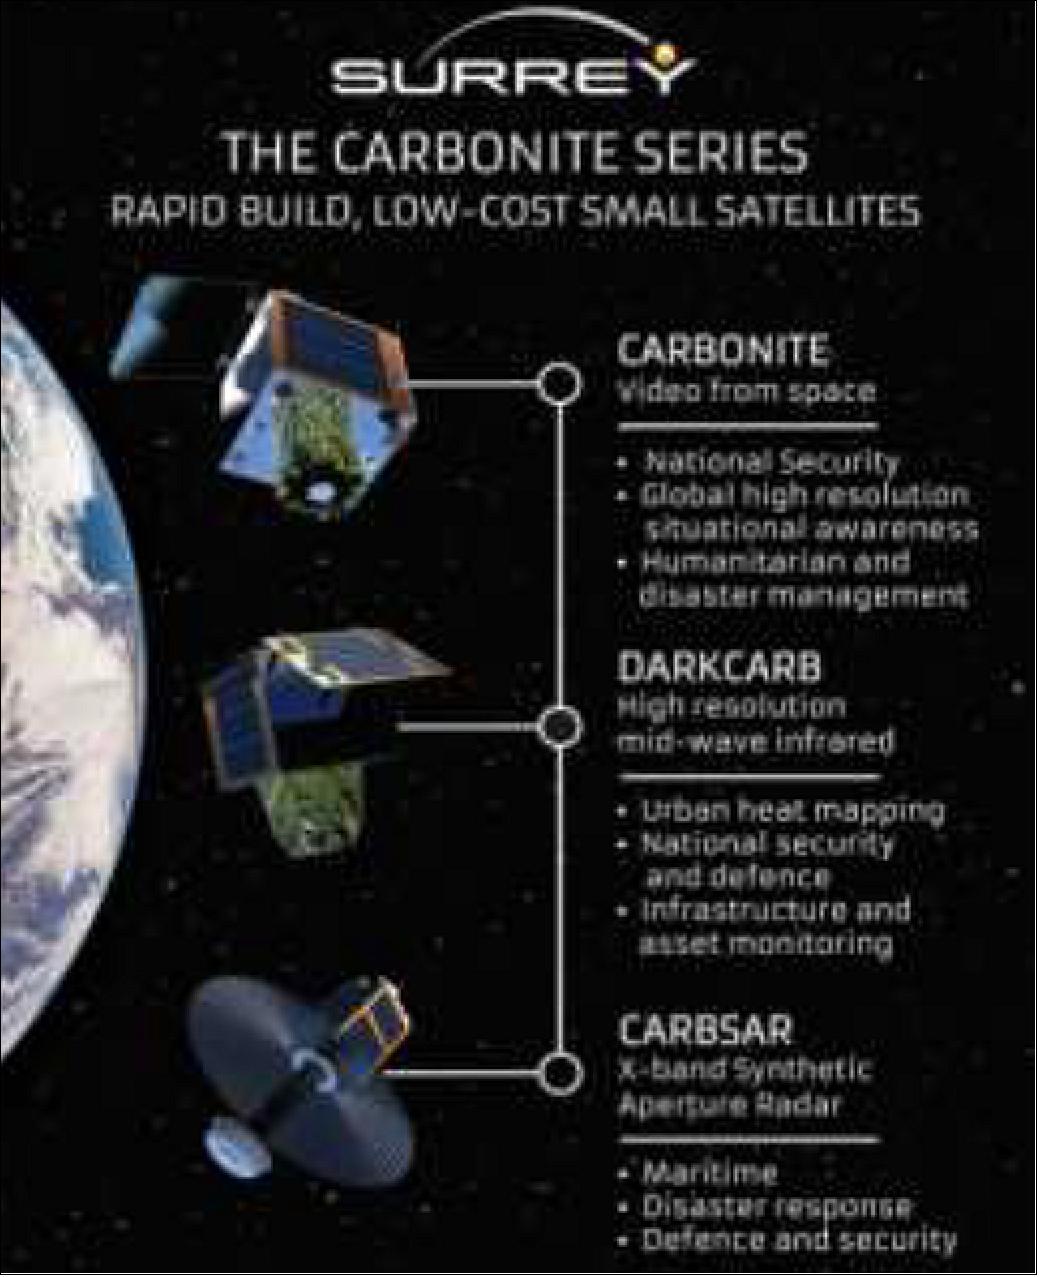 Figure 17: CarbSAR is part of a series of small EO spacecraft (image credit: SSTL)